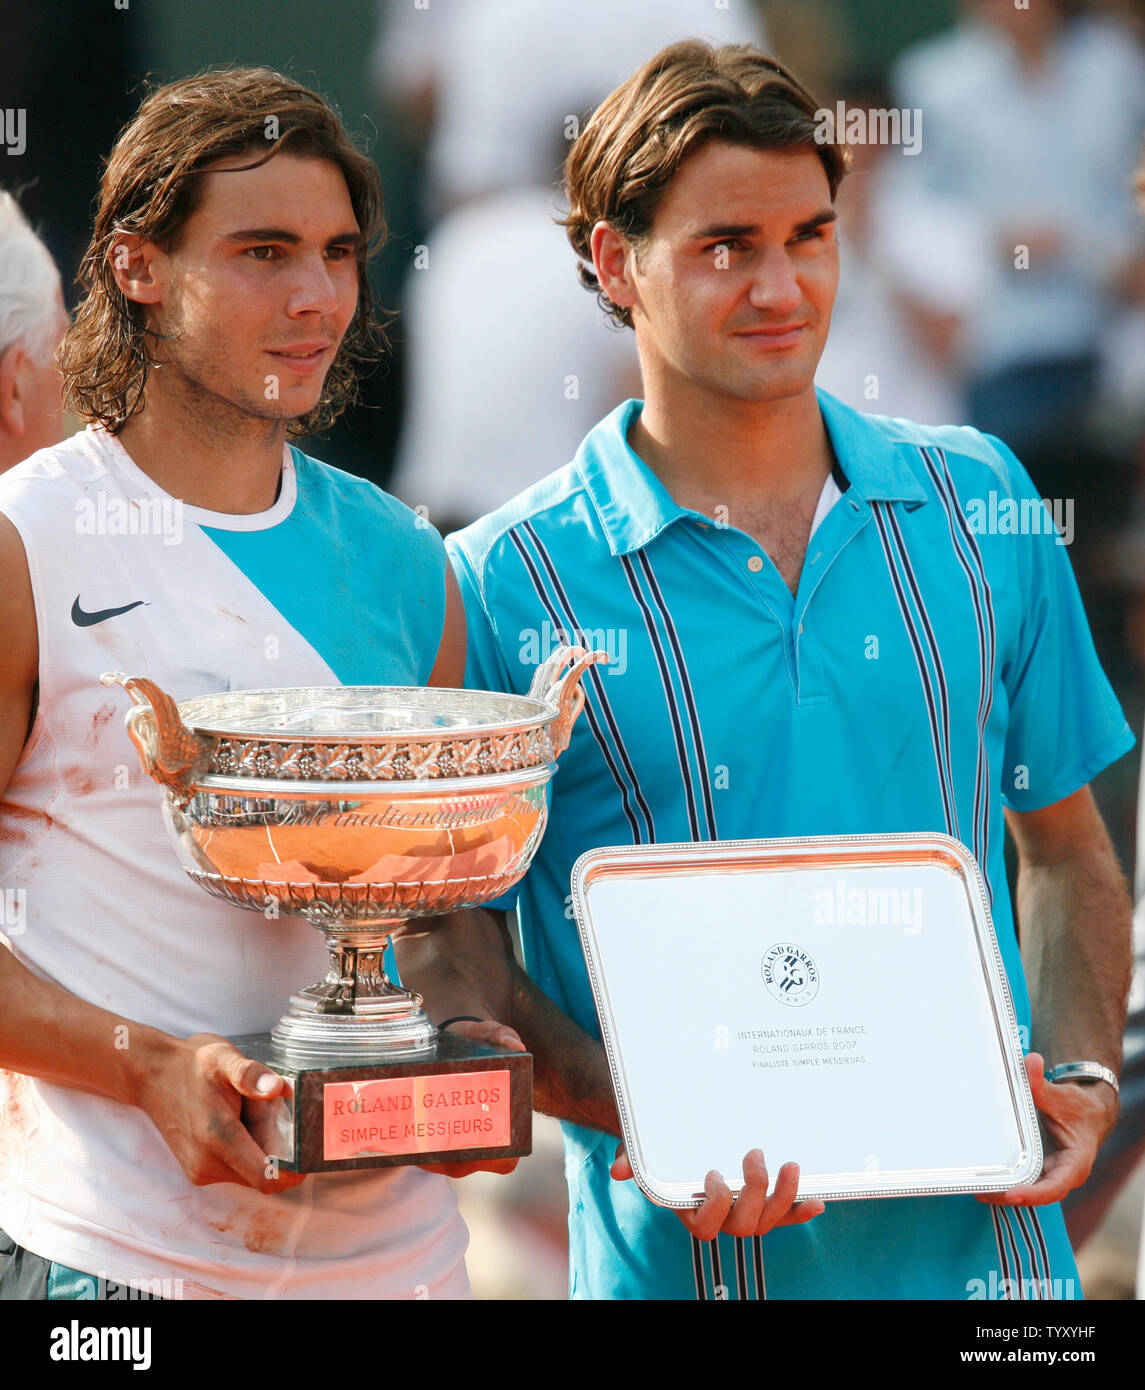 Spaniard Rafael Nadal (L) and Roger Federer of Switzerland pose together  after their final round match at the French Open at Roland Garros in Paris  on June 10, 2007. Nadal, the number